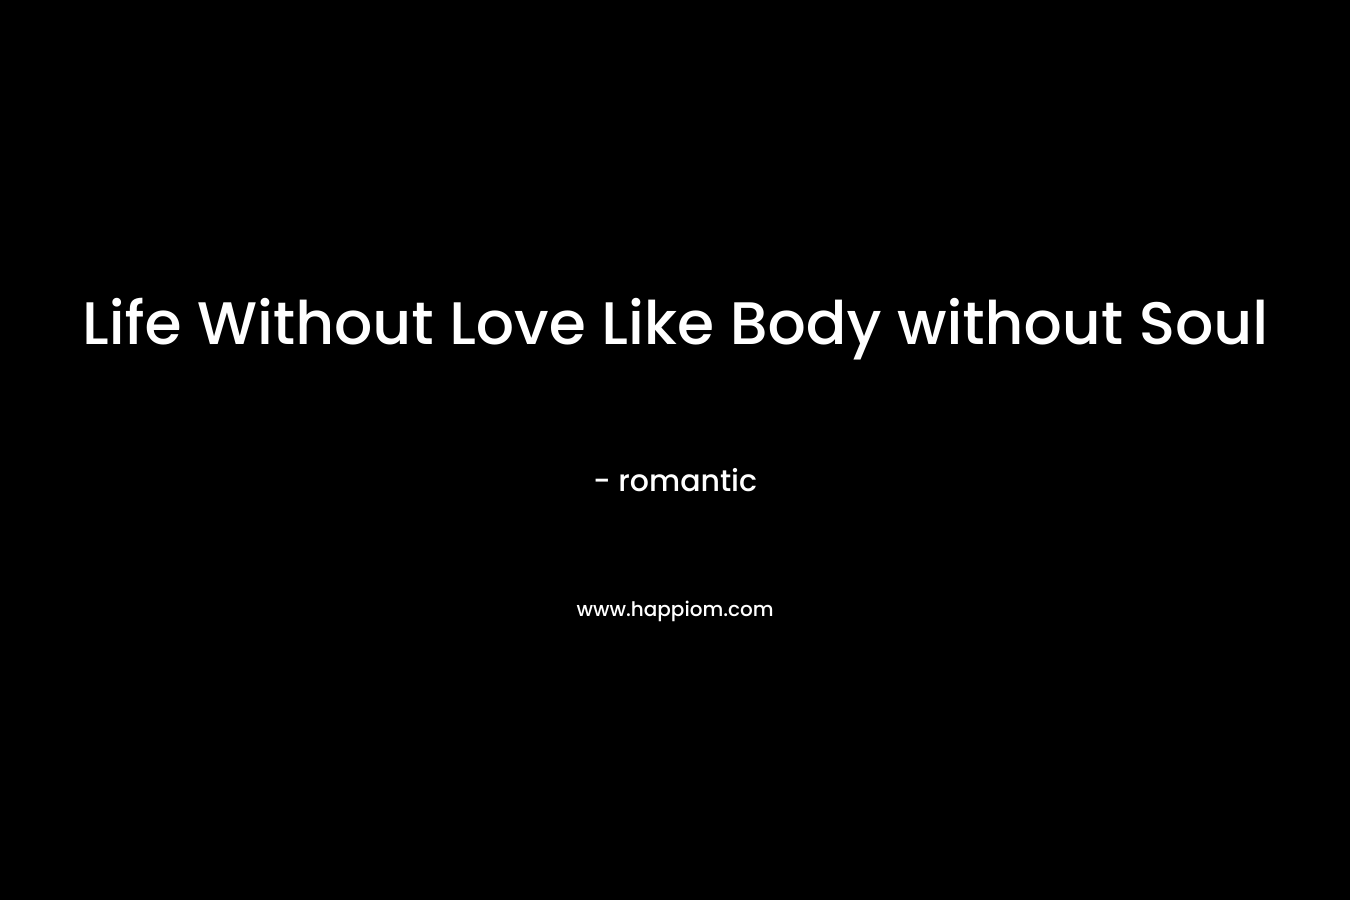 Life Without Love Like Body without Soul